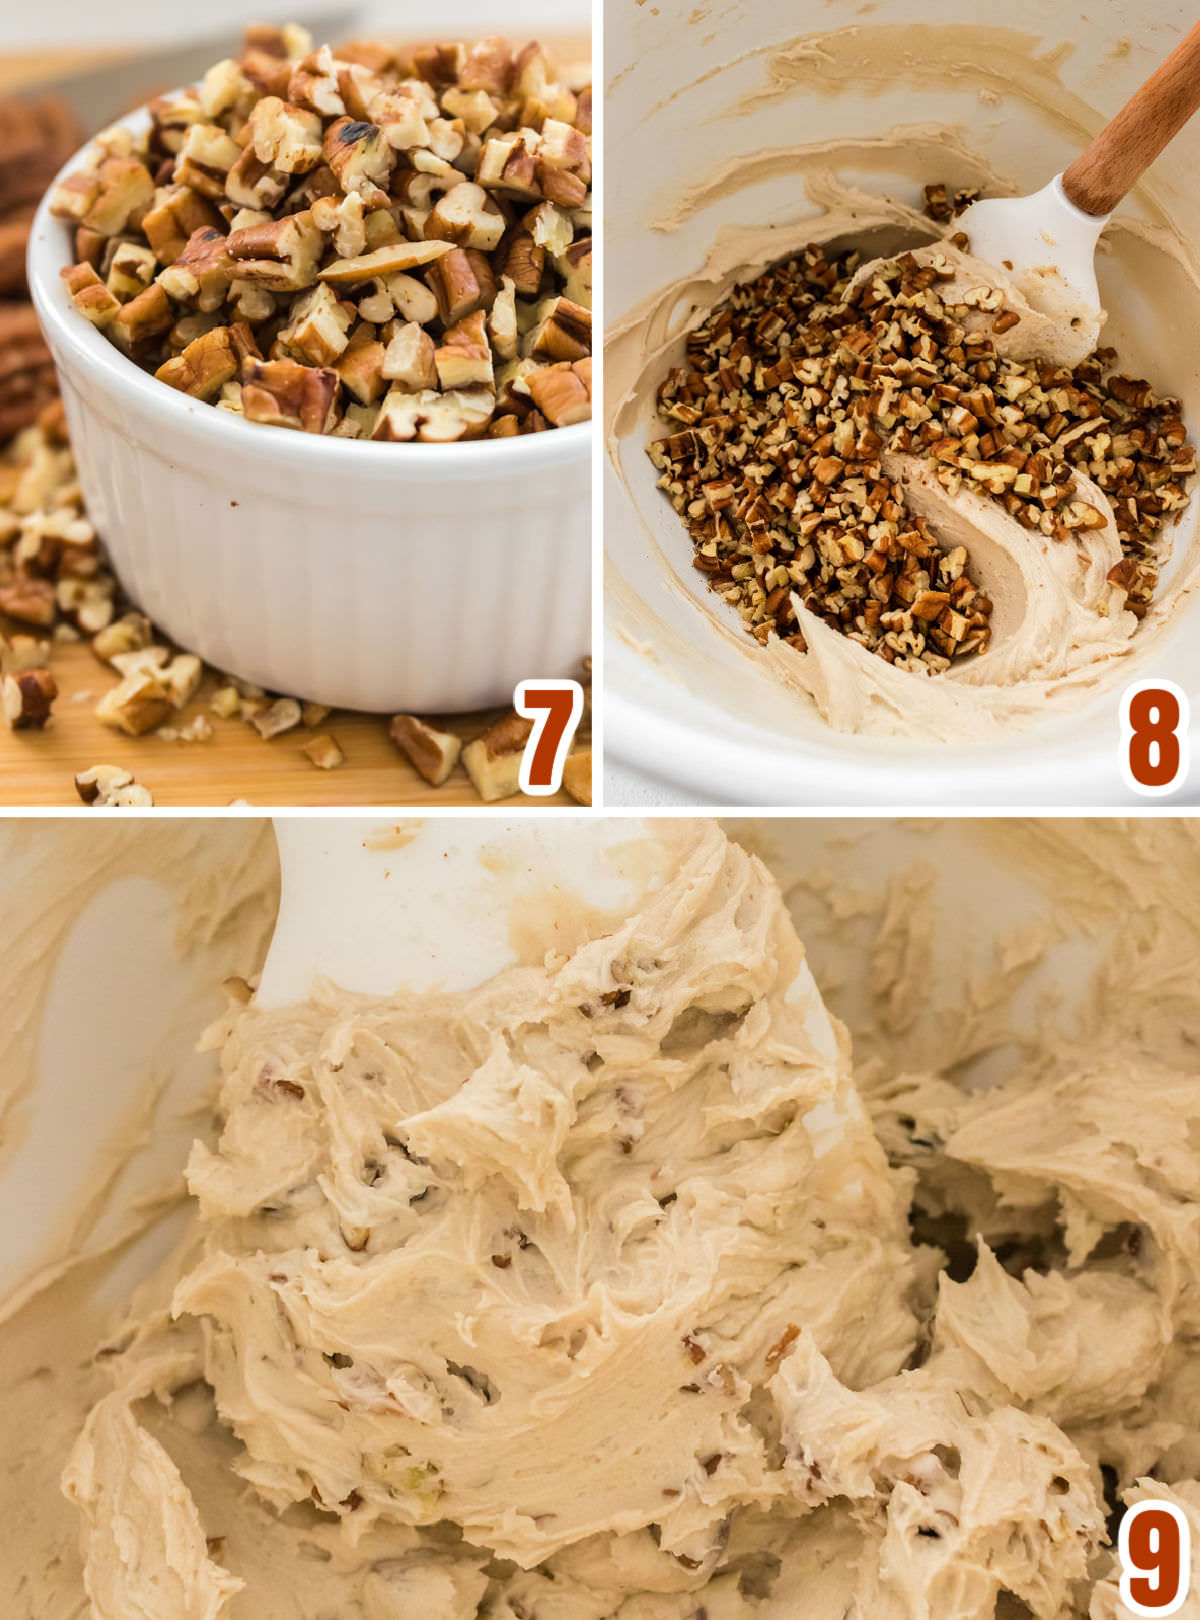 Collage images showing the steps for chopping pecans and adding them to the maple frosting.